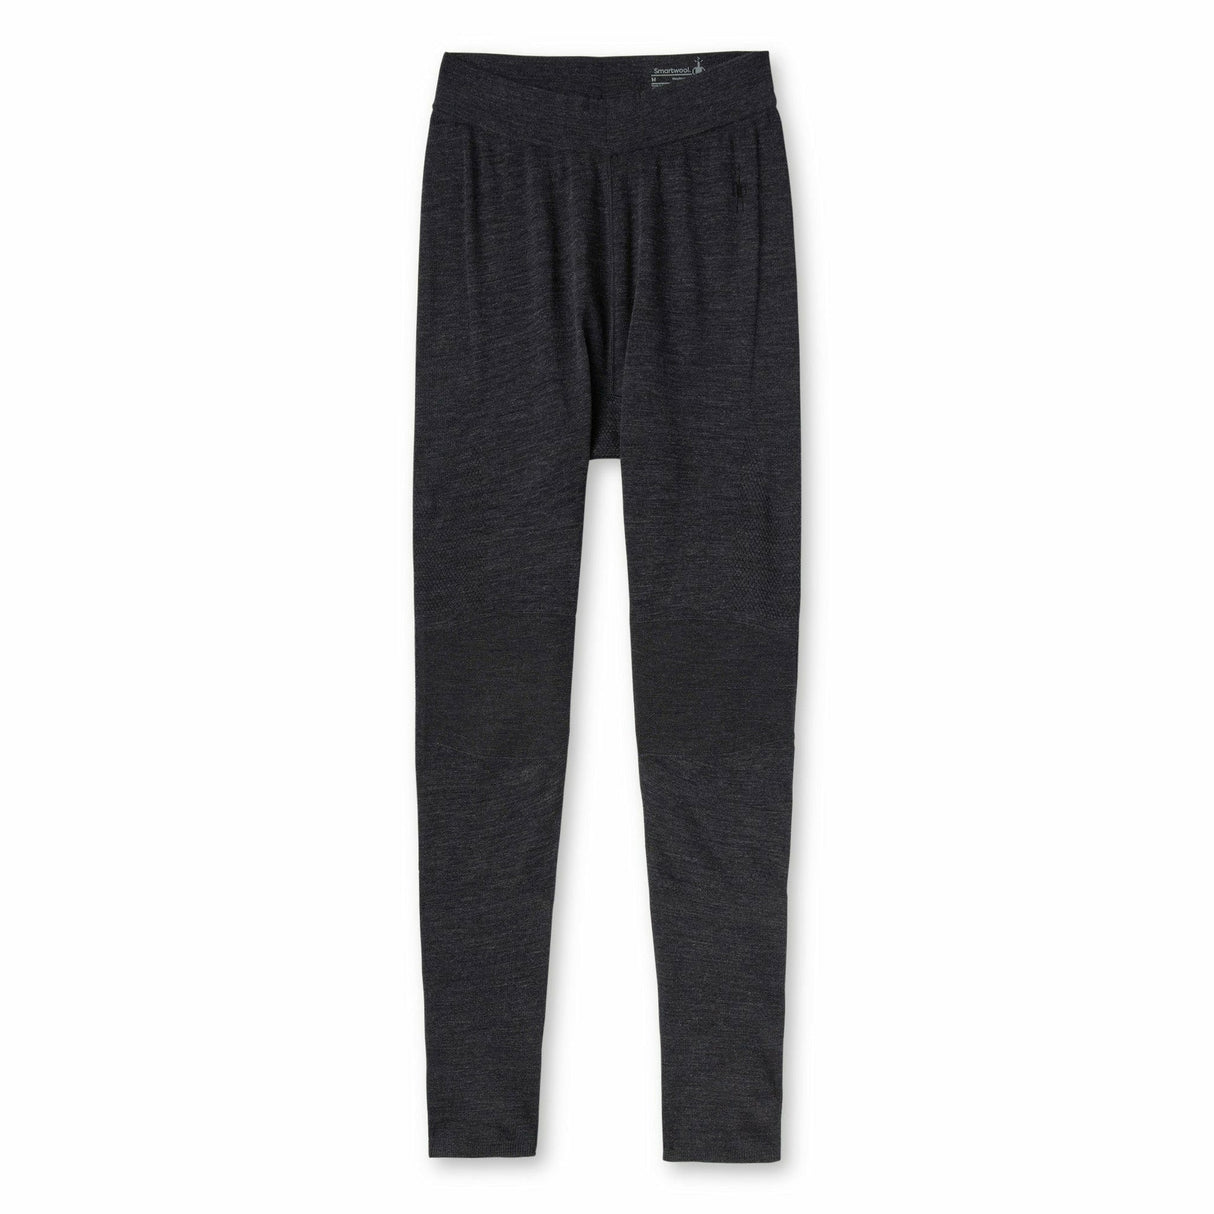 Smartwool Mens Intraknit Thermal Merino Base Layer Bottoms  -  Small / Charcoal Heather/Black